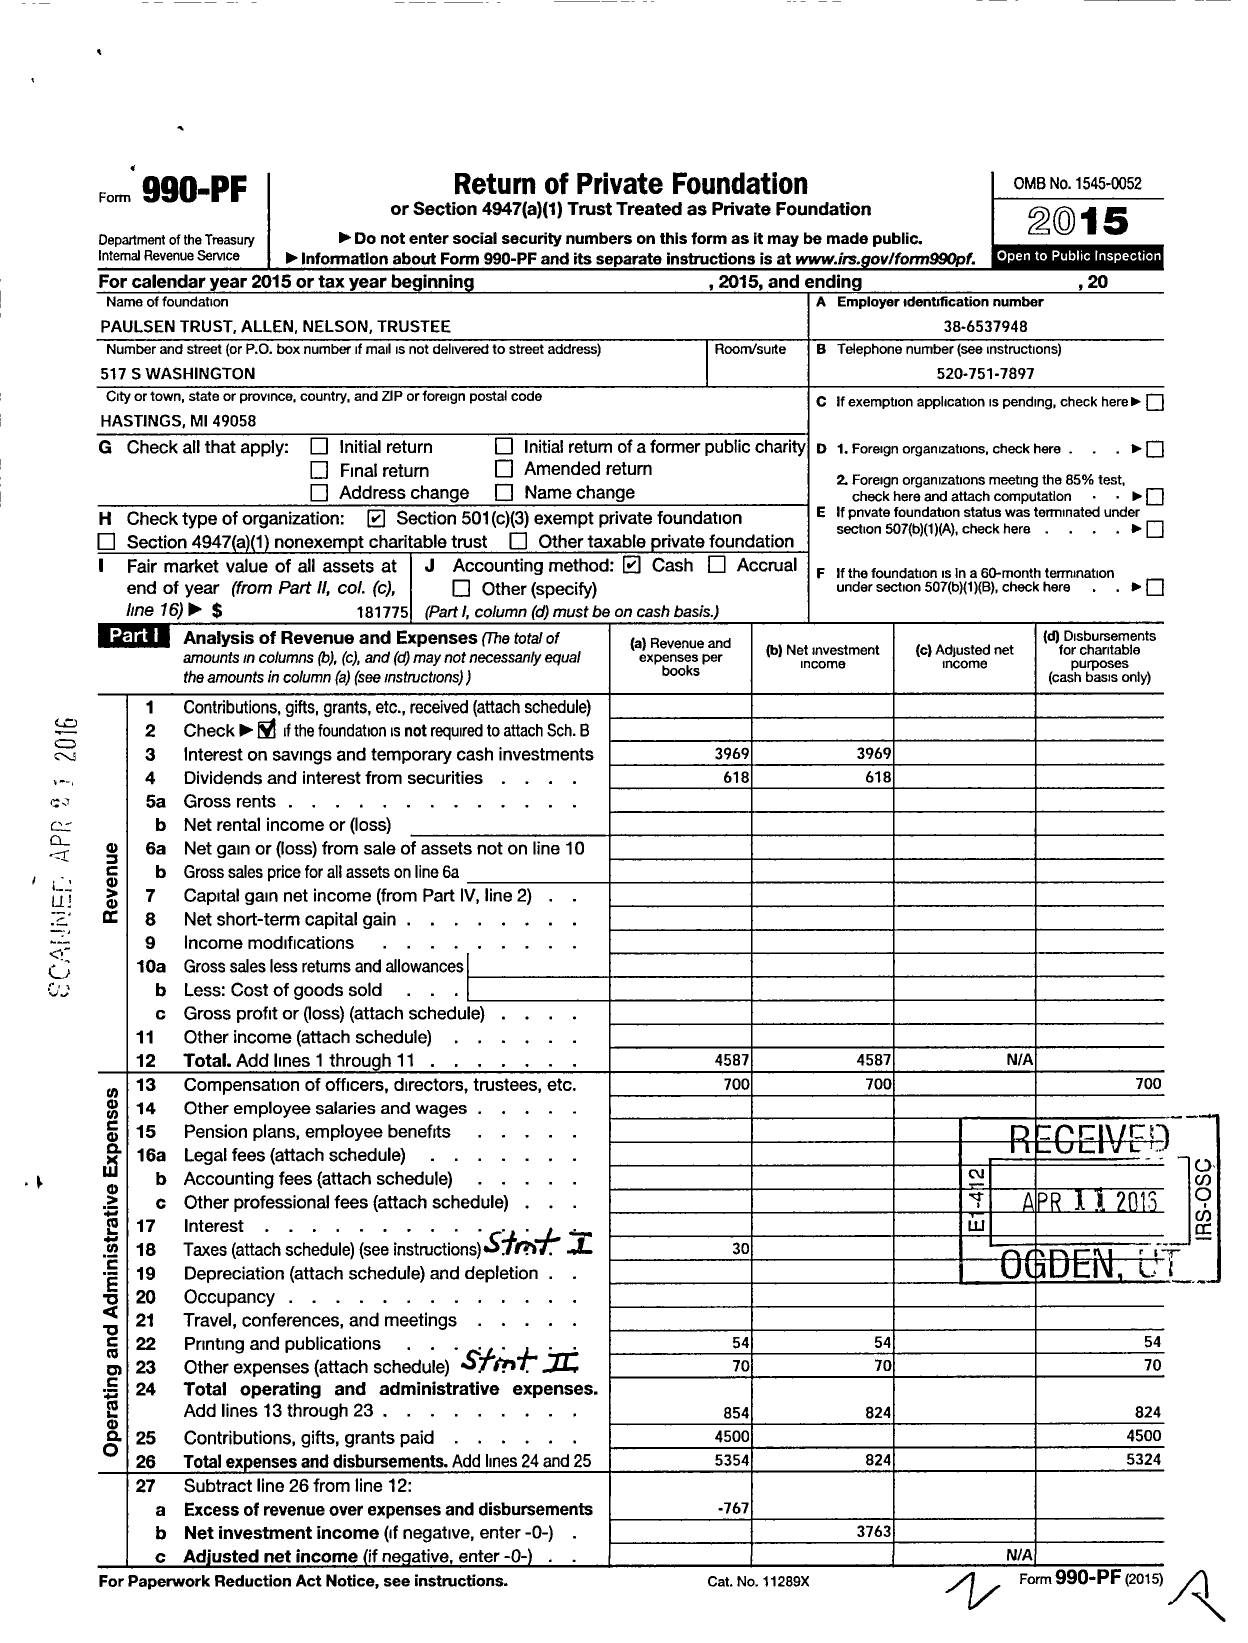 Image of first page of 2015 Form 990PF for Paulsen Trust Allen Nelson Trustee